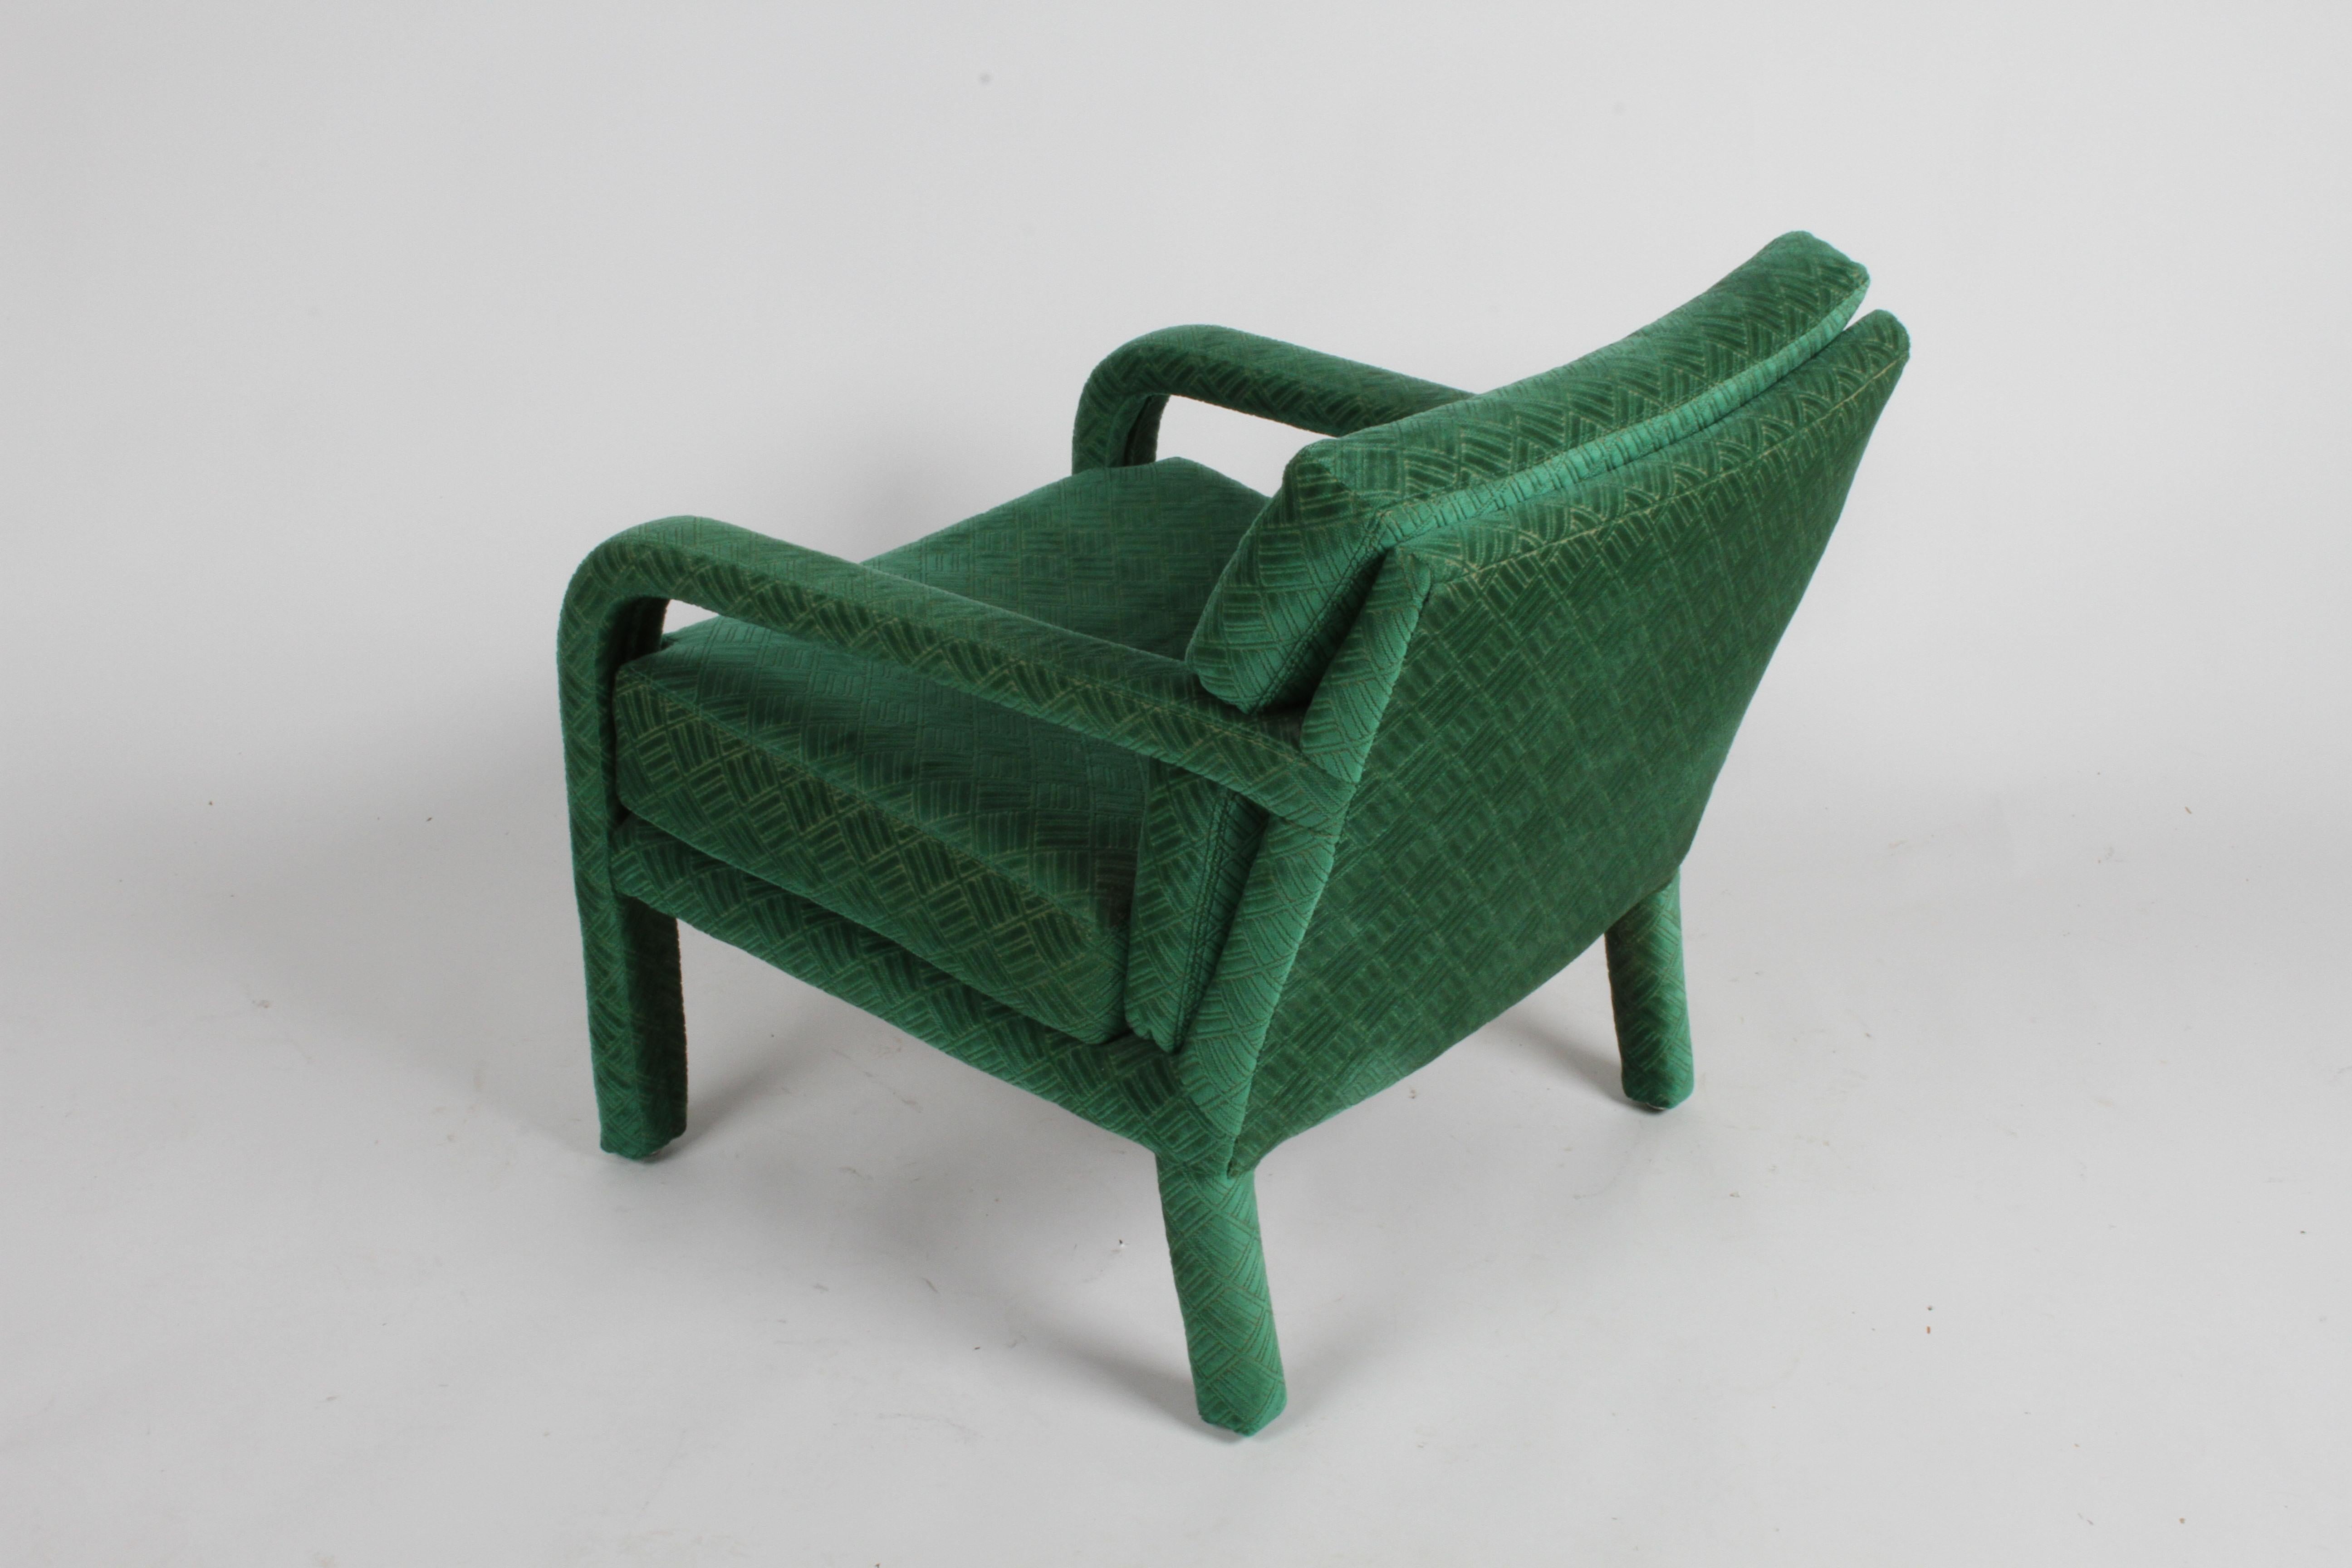 Pair of 1970s Directional Lounge Chairs in a Textured Emerald Green Upholstery 6